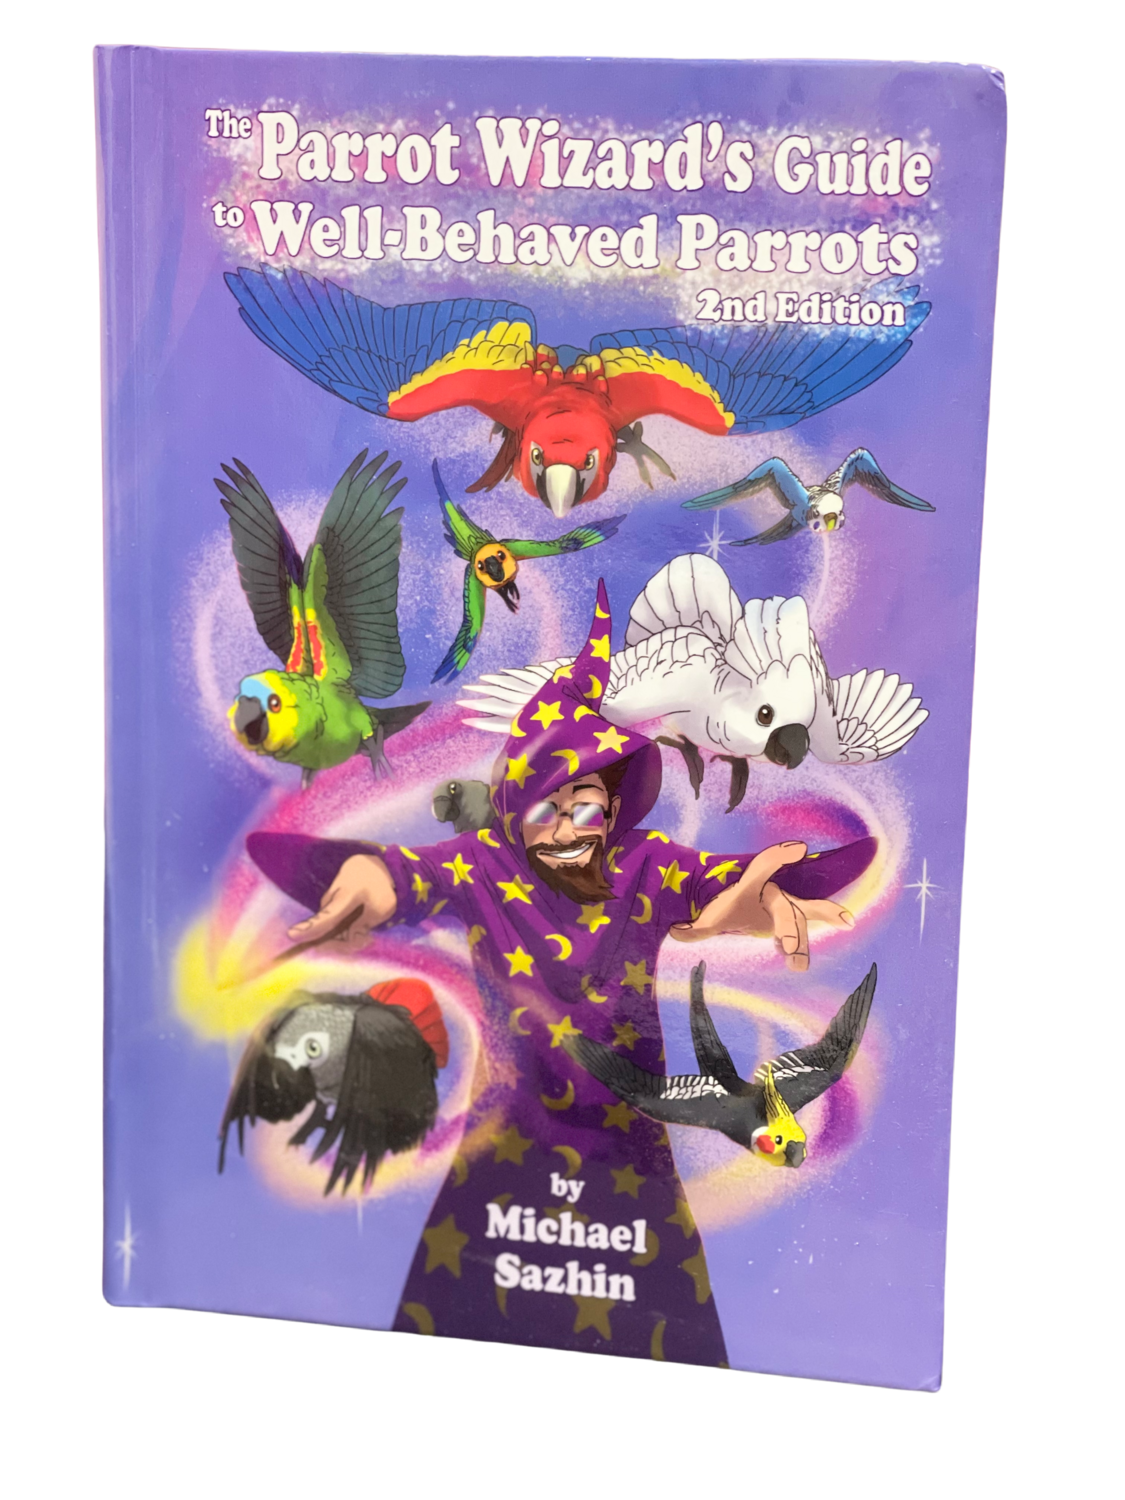 The Parrot Wizard's Guide to Well-Behaved Parrots Hardcover Book -- 2nd Edition